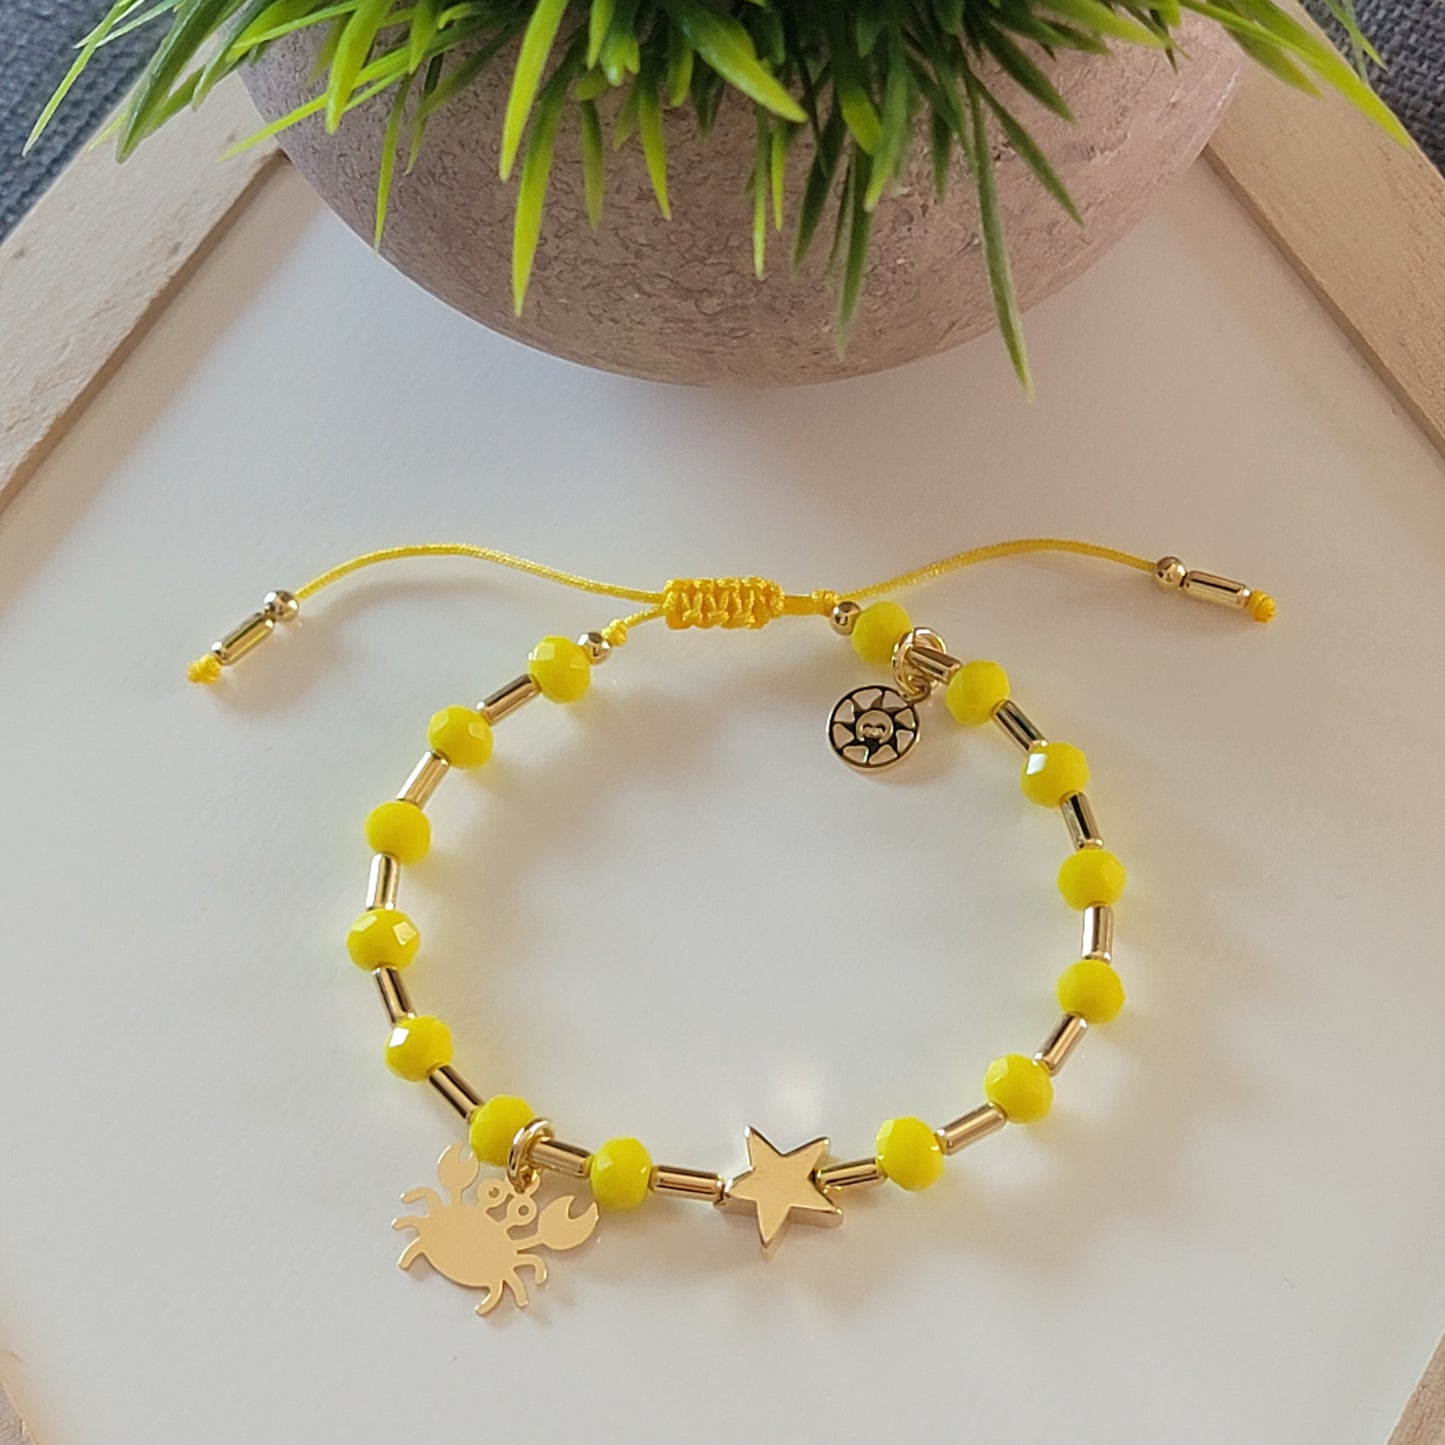 Crab and Star Bracelet, Yellow Crystals and 18k Gold-Filled Charms, Tube Beads, and Details